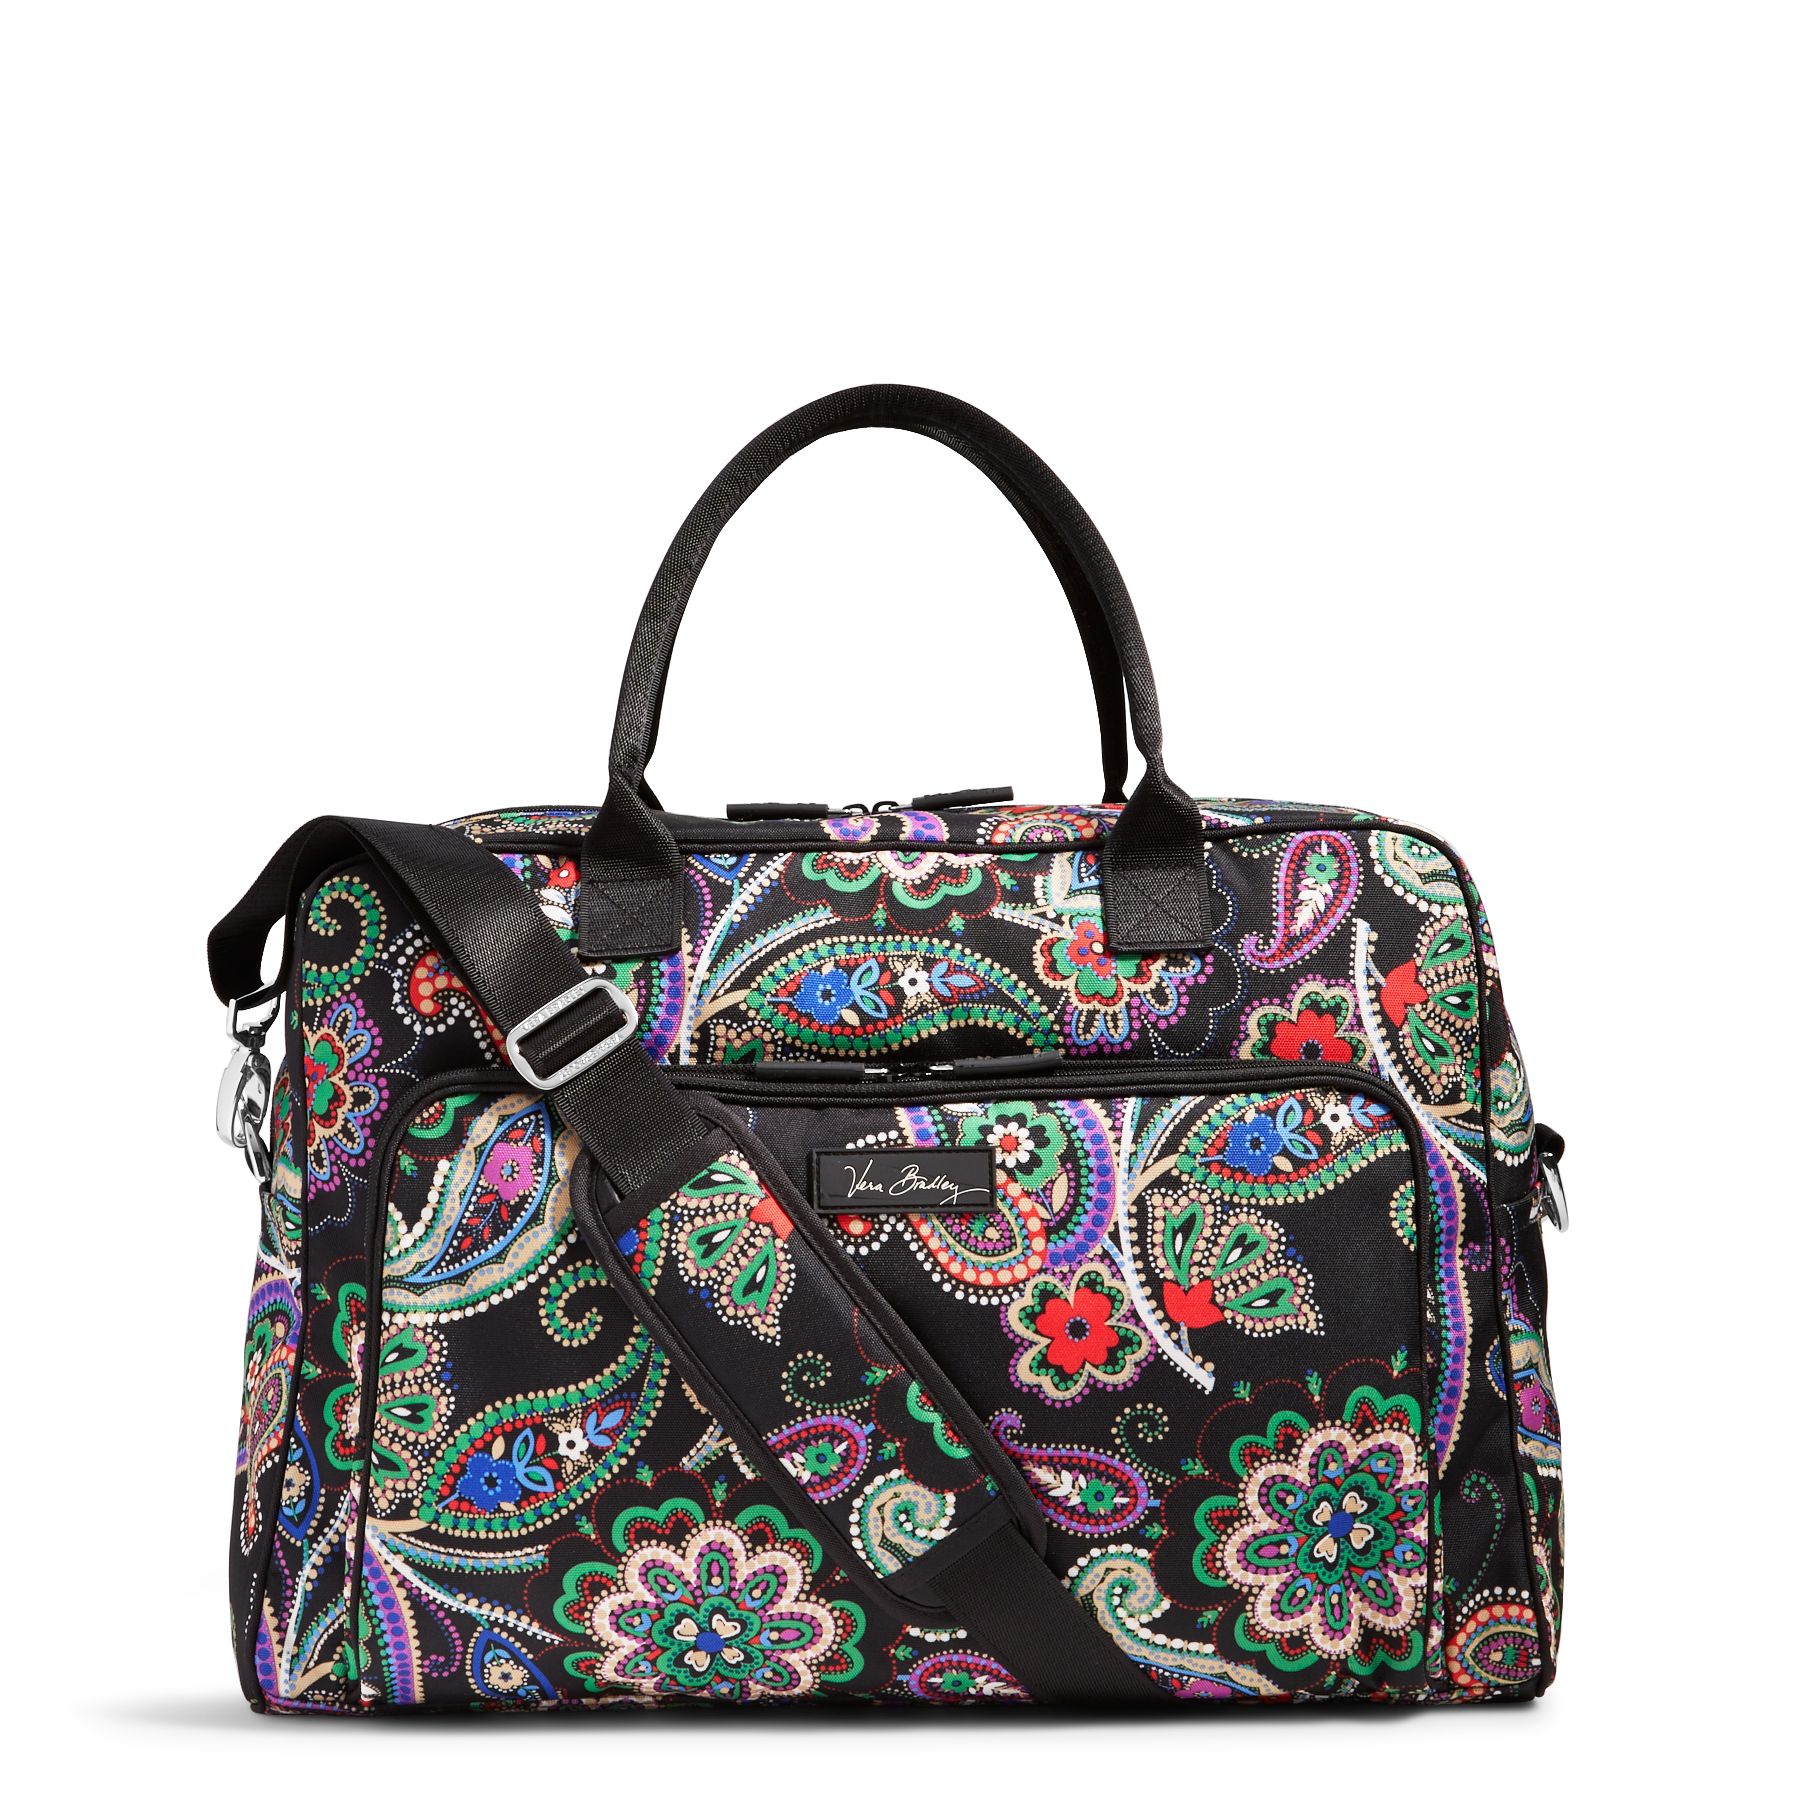 Vera Bradley Coupon Code: Gifts for Women